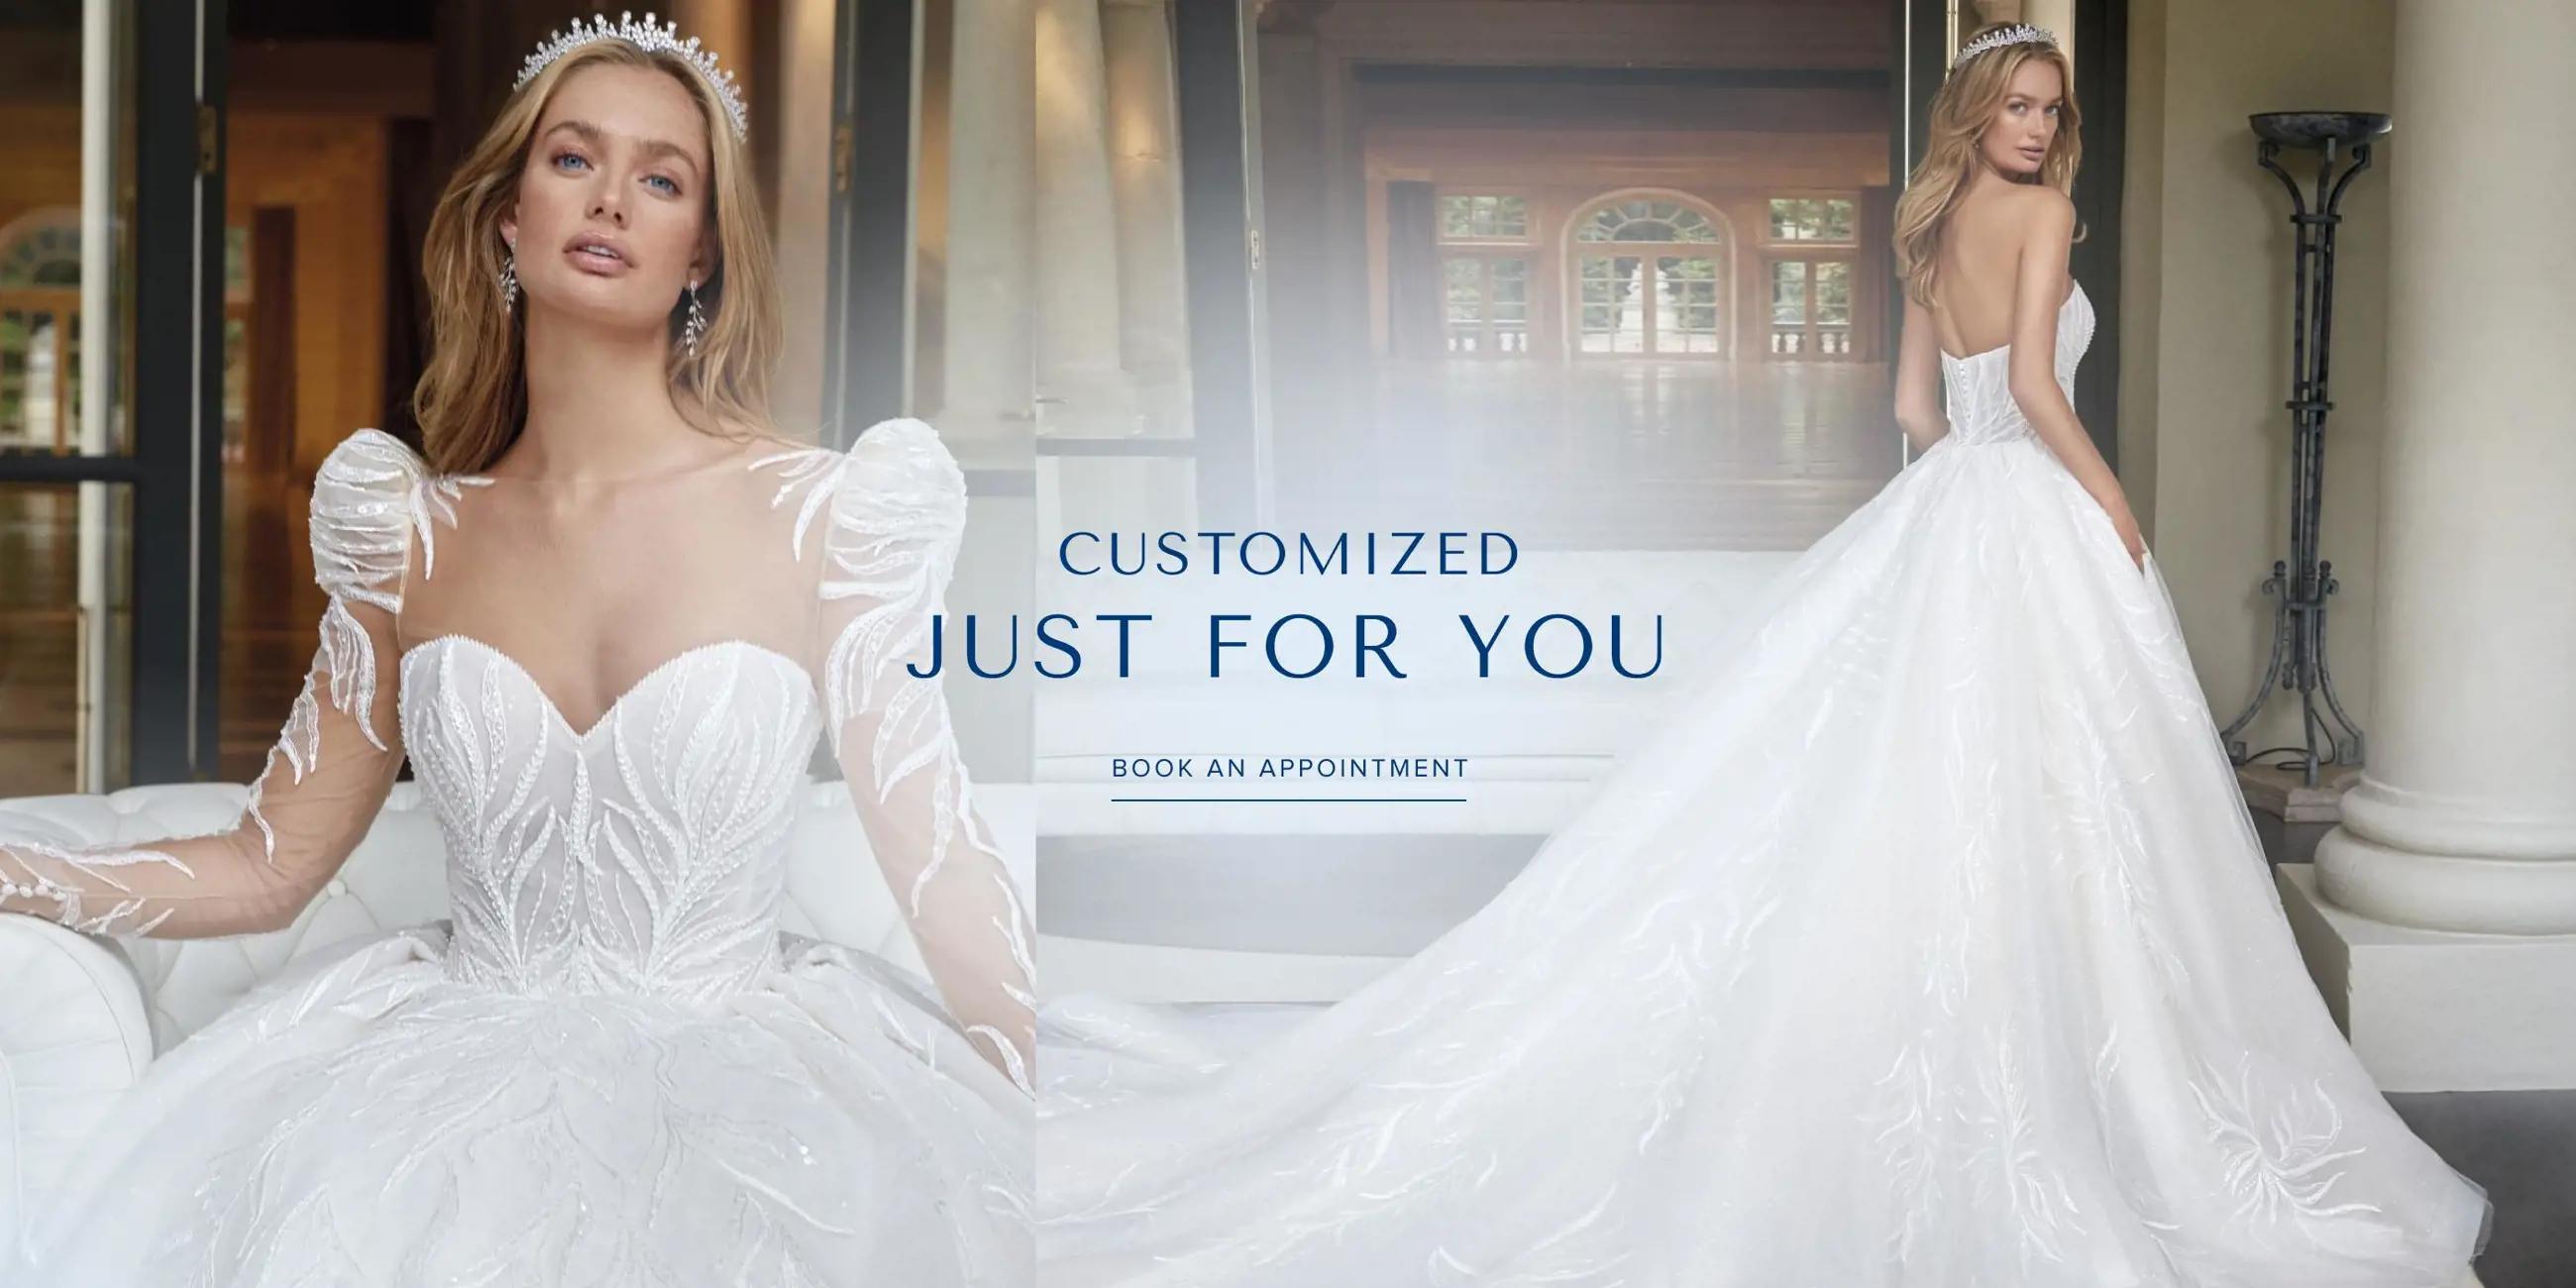 Banner promoting customized gowns